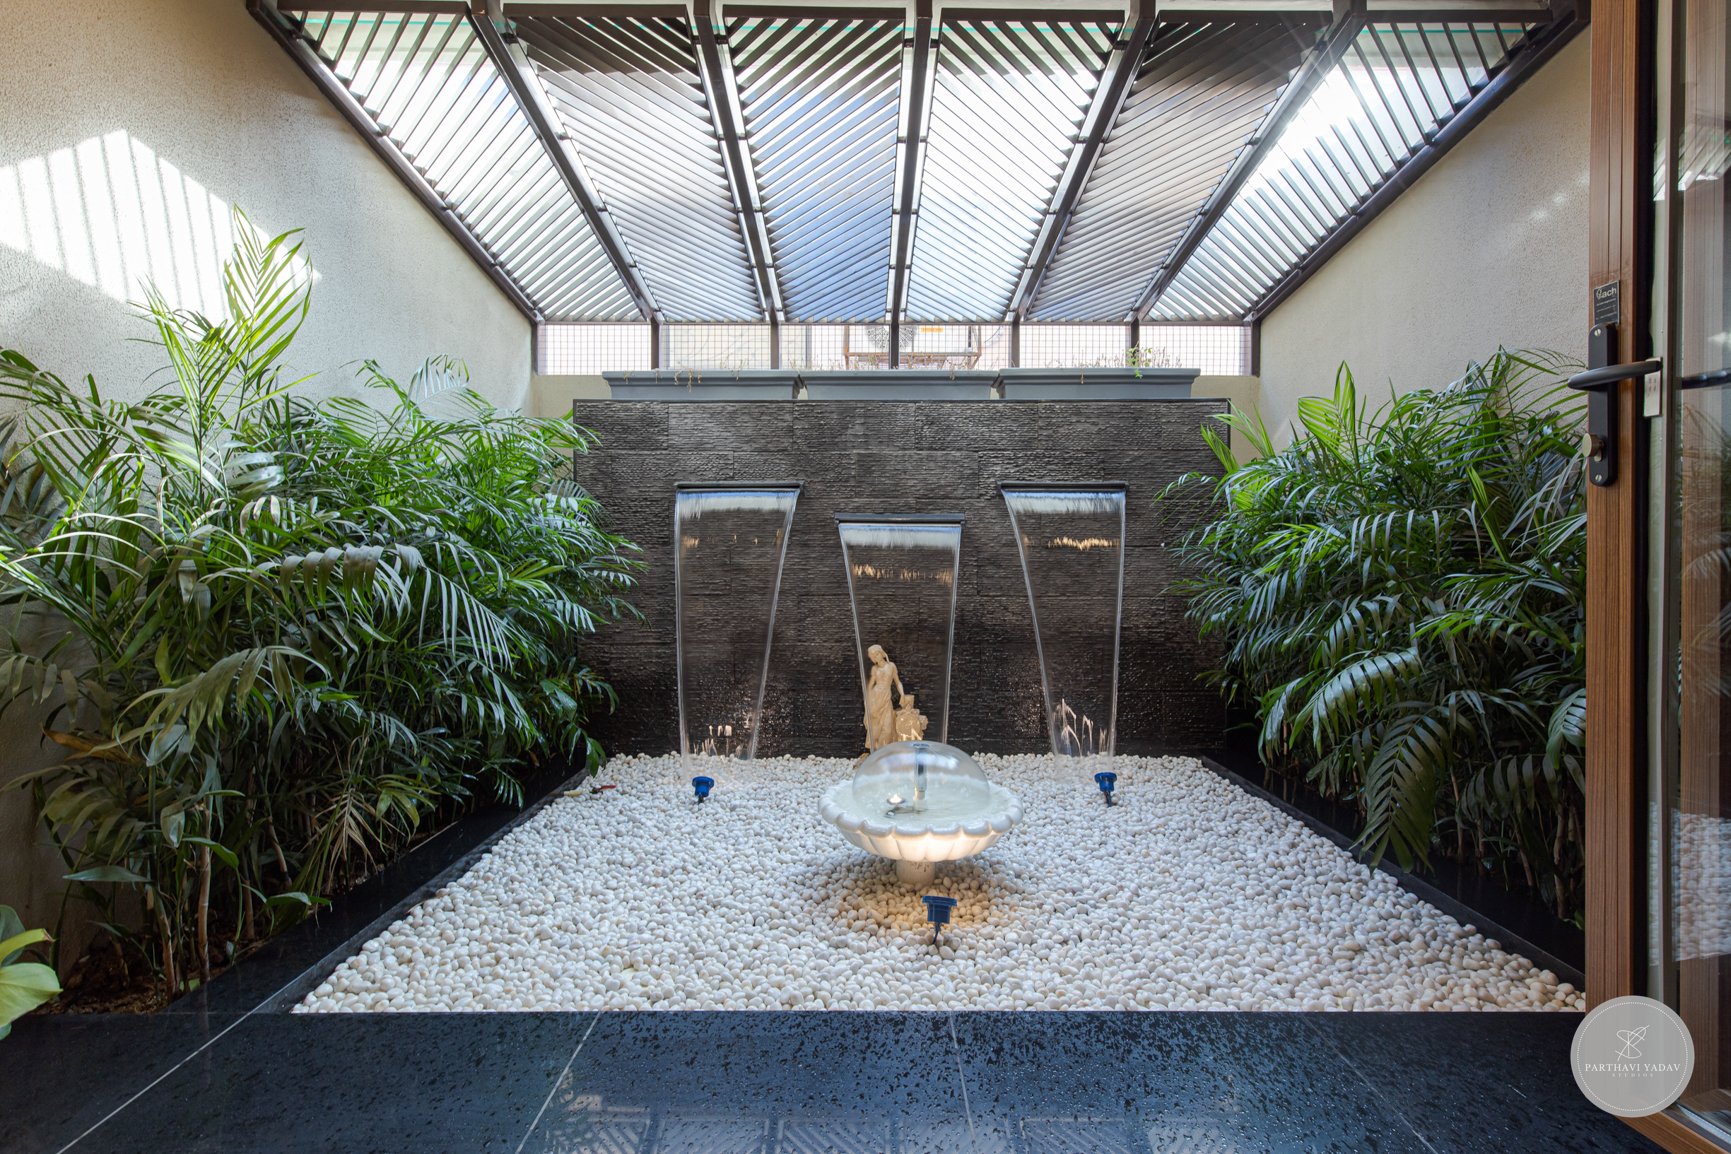 best interior photographer in pune bangalore - indoor fountain with marble statue with greens and sunlight in a bungalow.jpg